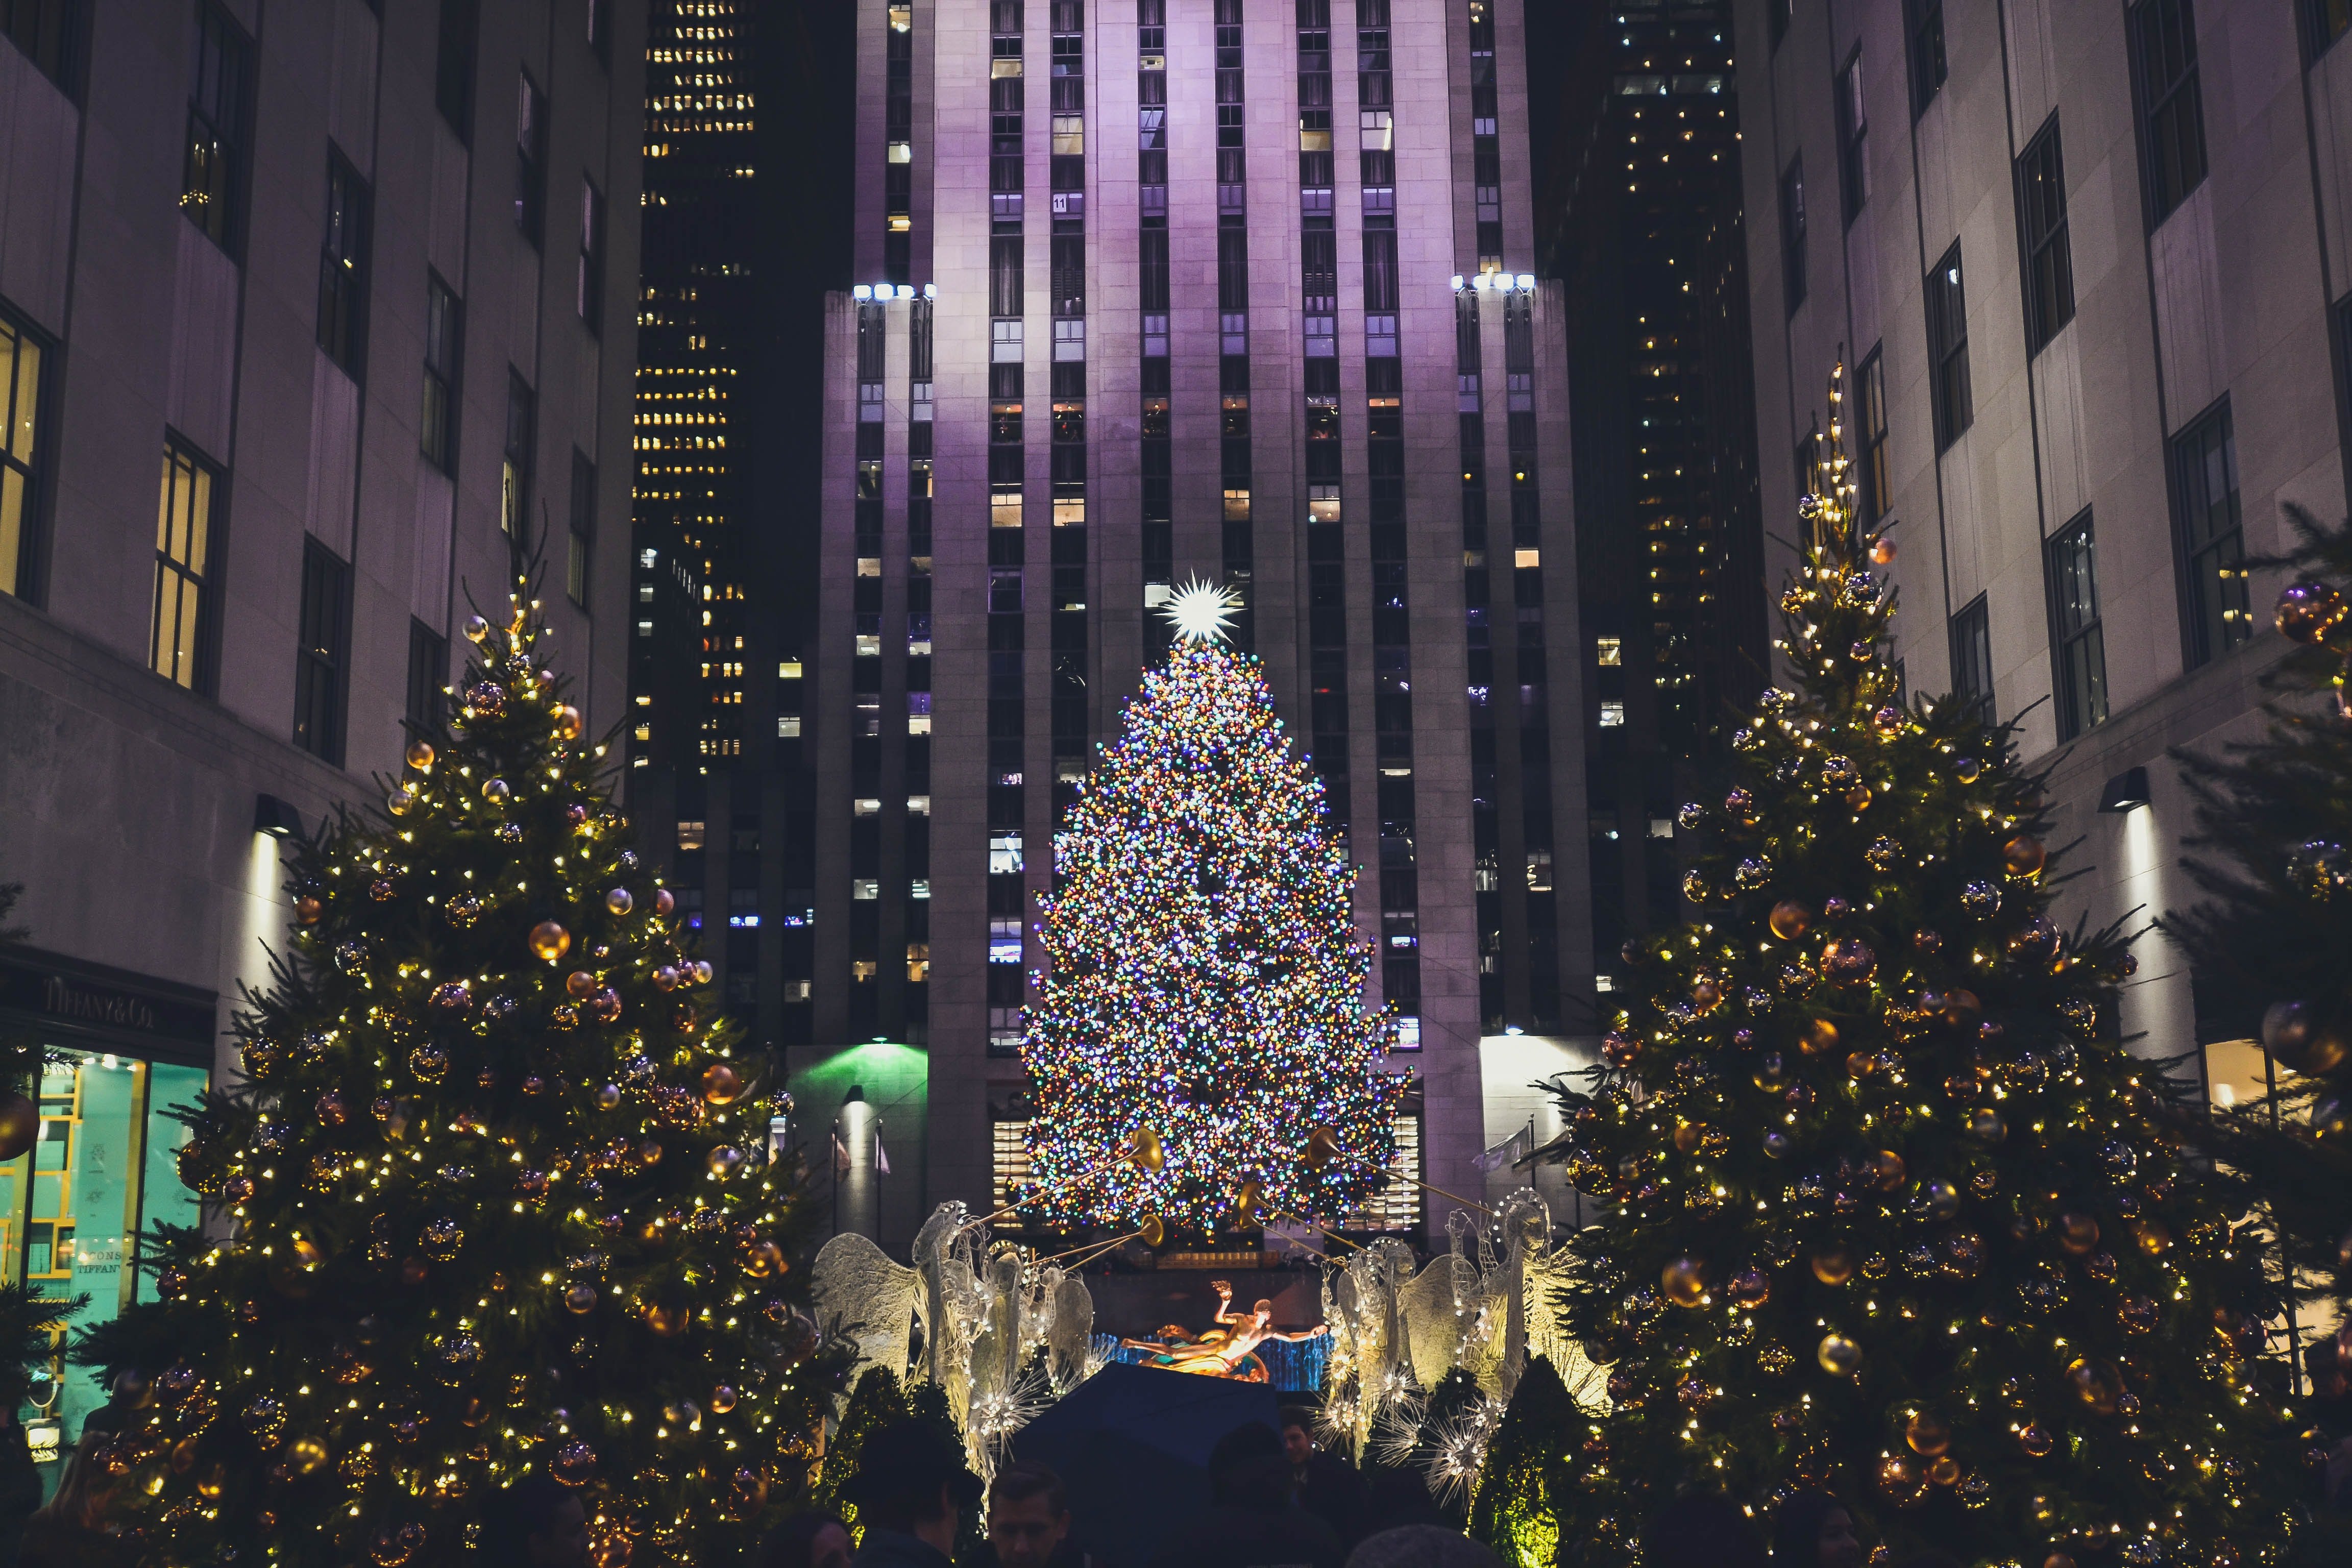 The Rockefeller Center pictured during a previous Christmas with their tree lit. | Source: Unsplash.